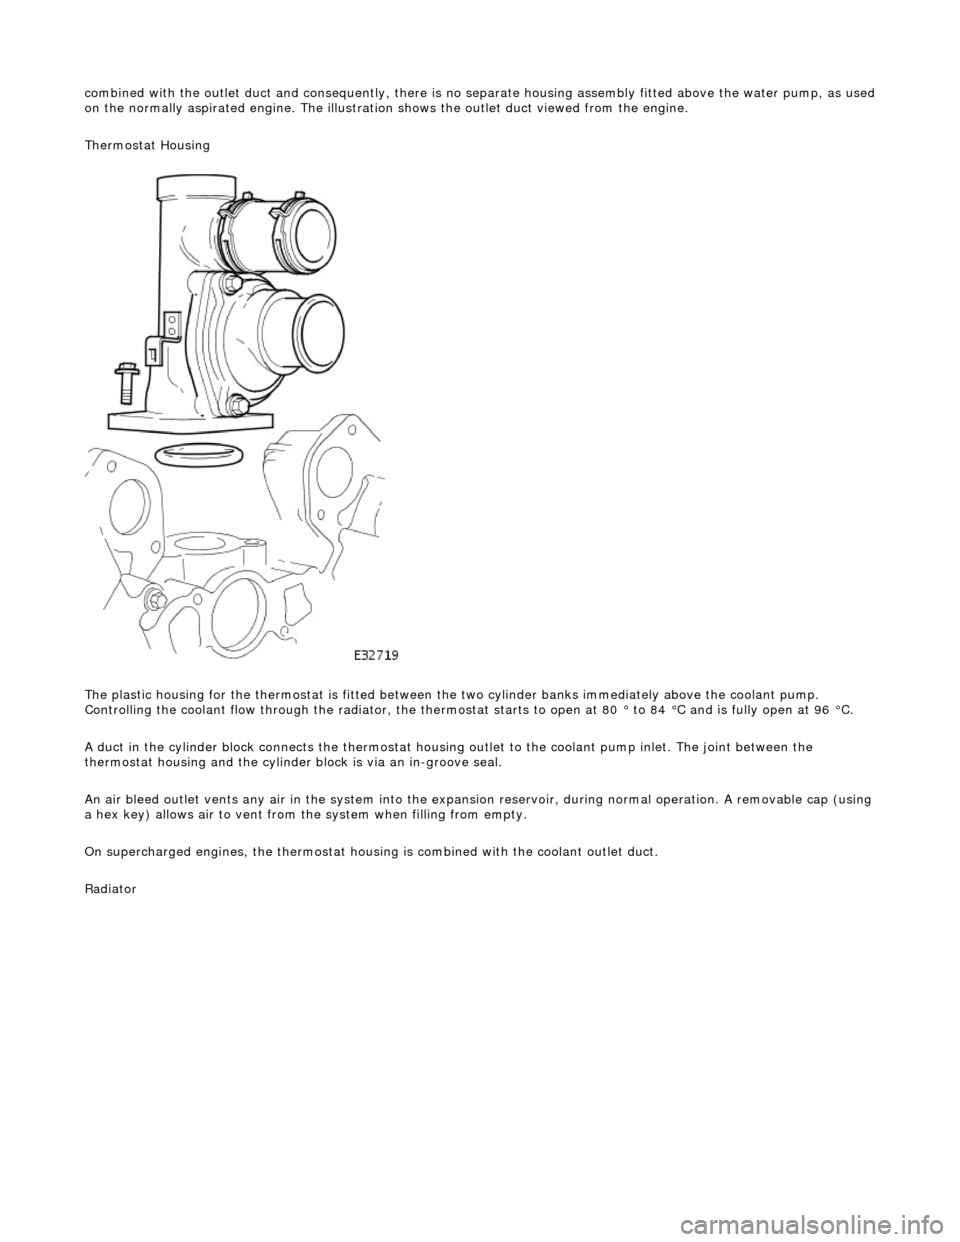 JAGUAR X308 1998 2.G Workshop Manual combin
 ed with the outlet duct and consequently, there is no separate housin
g assembly fitted above the water pump, as used  
on the normally aspirated engine. The illustration shows the outlet duct